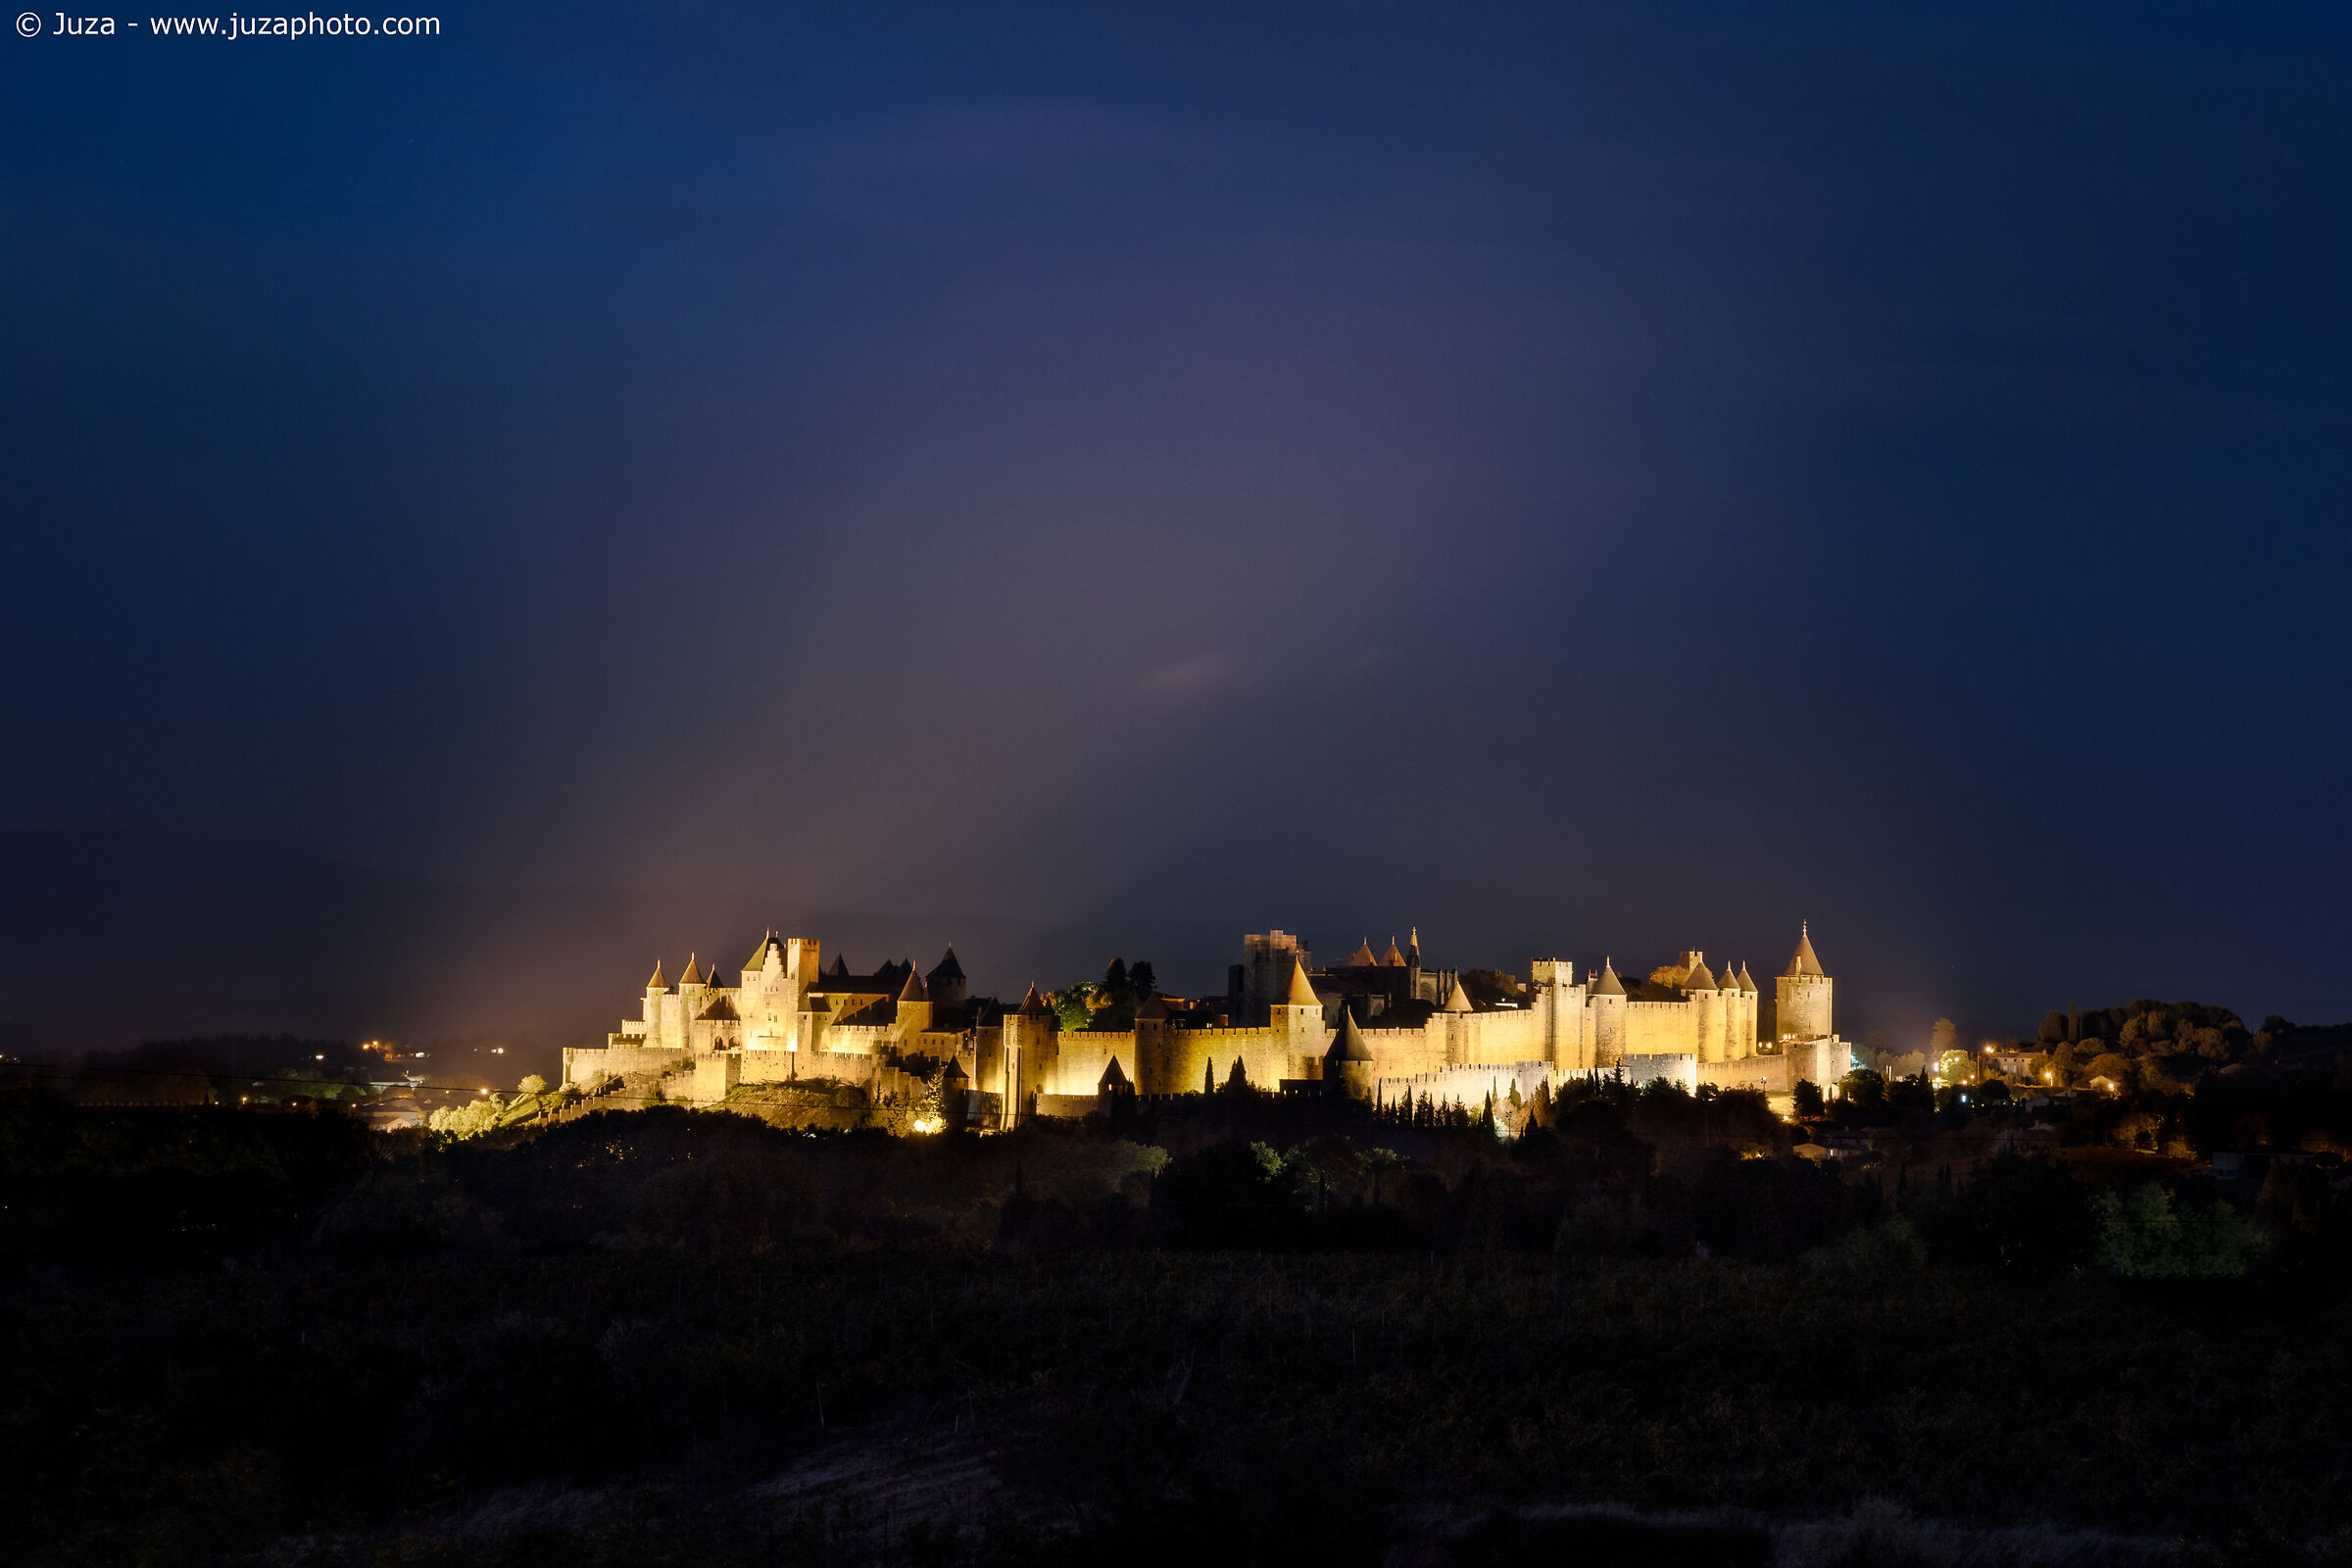 The enchanted city, Carcassonne...